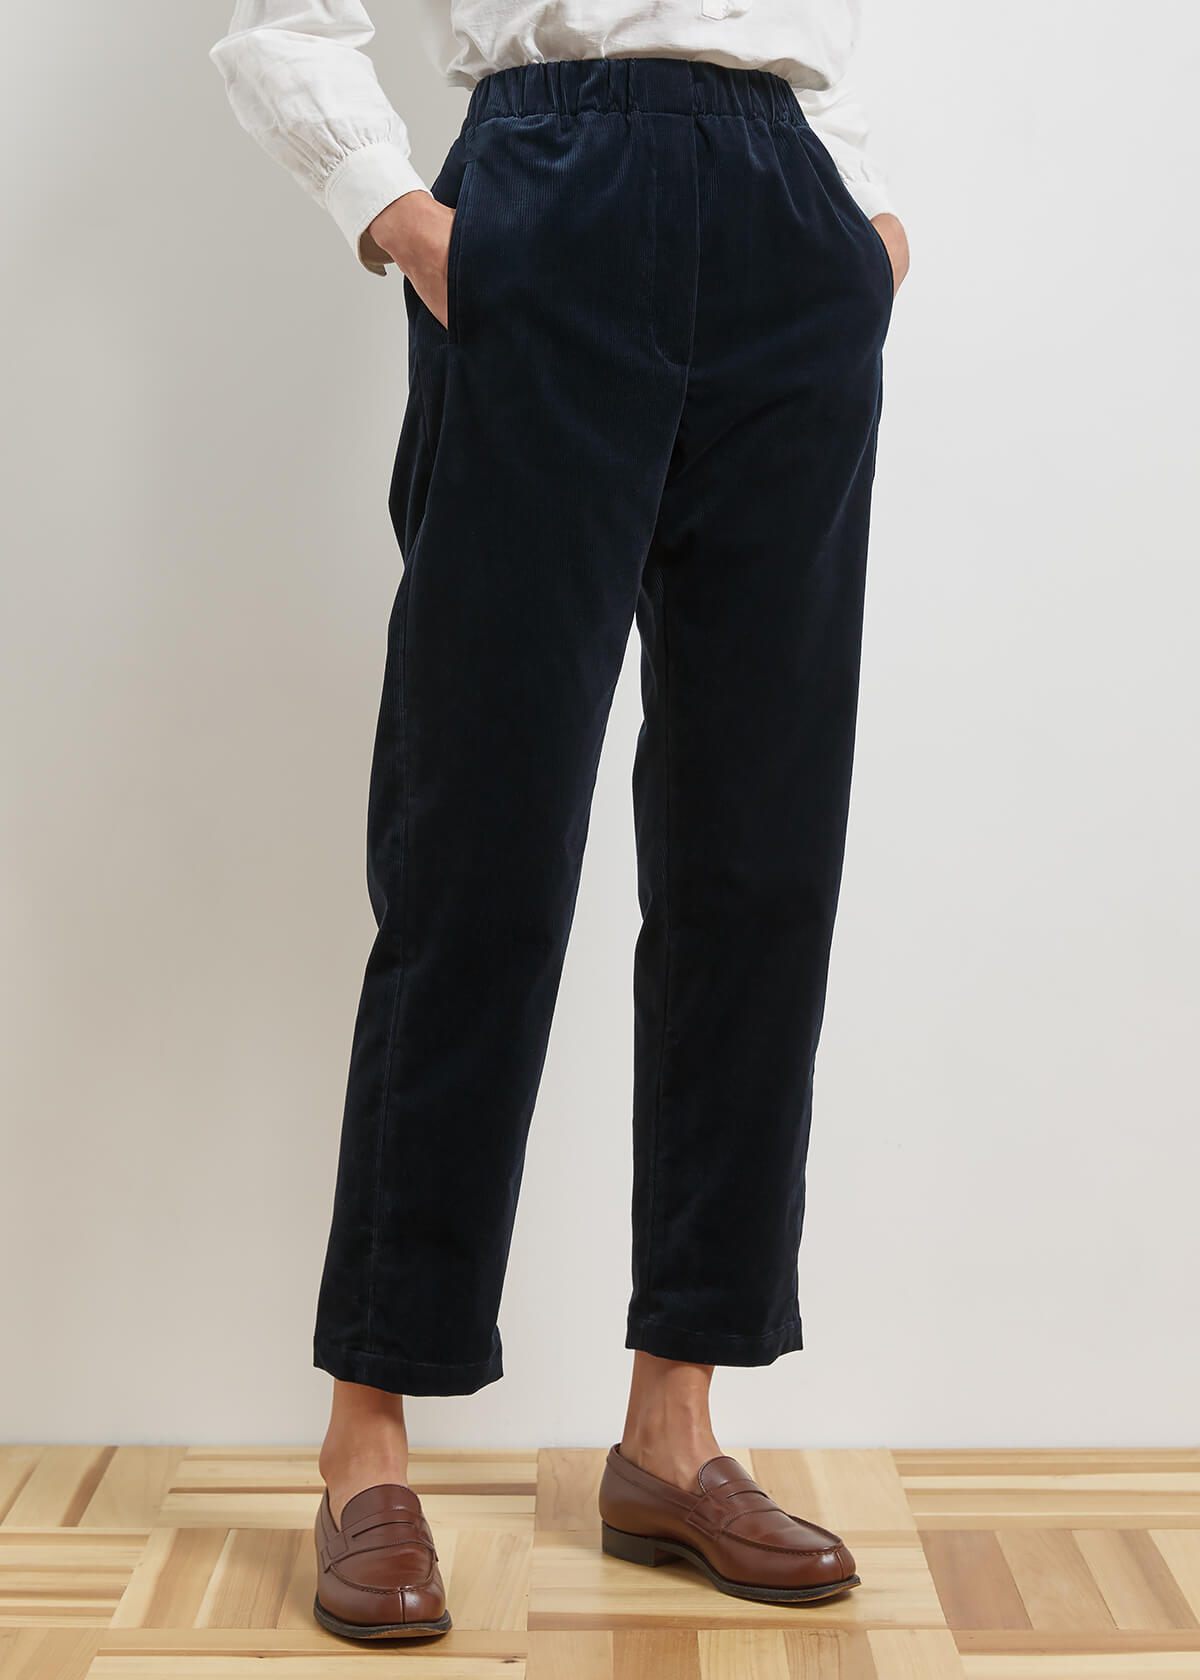 Pegasus Sherpa Lined Cord Trousers | Chums